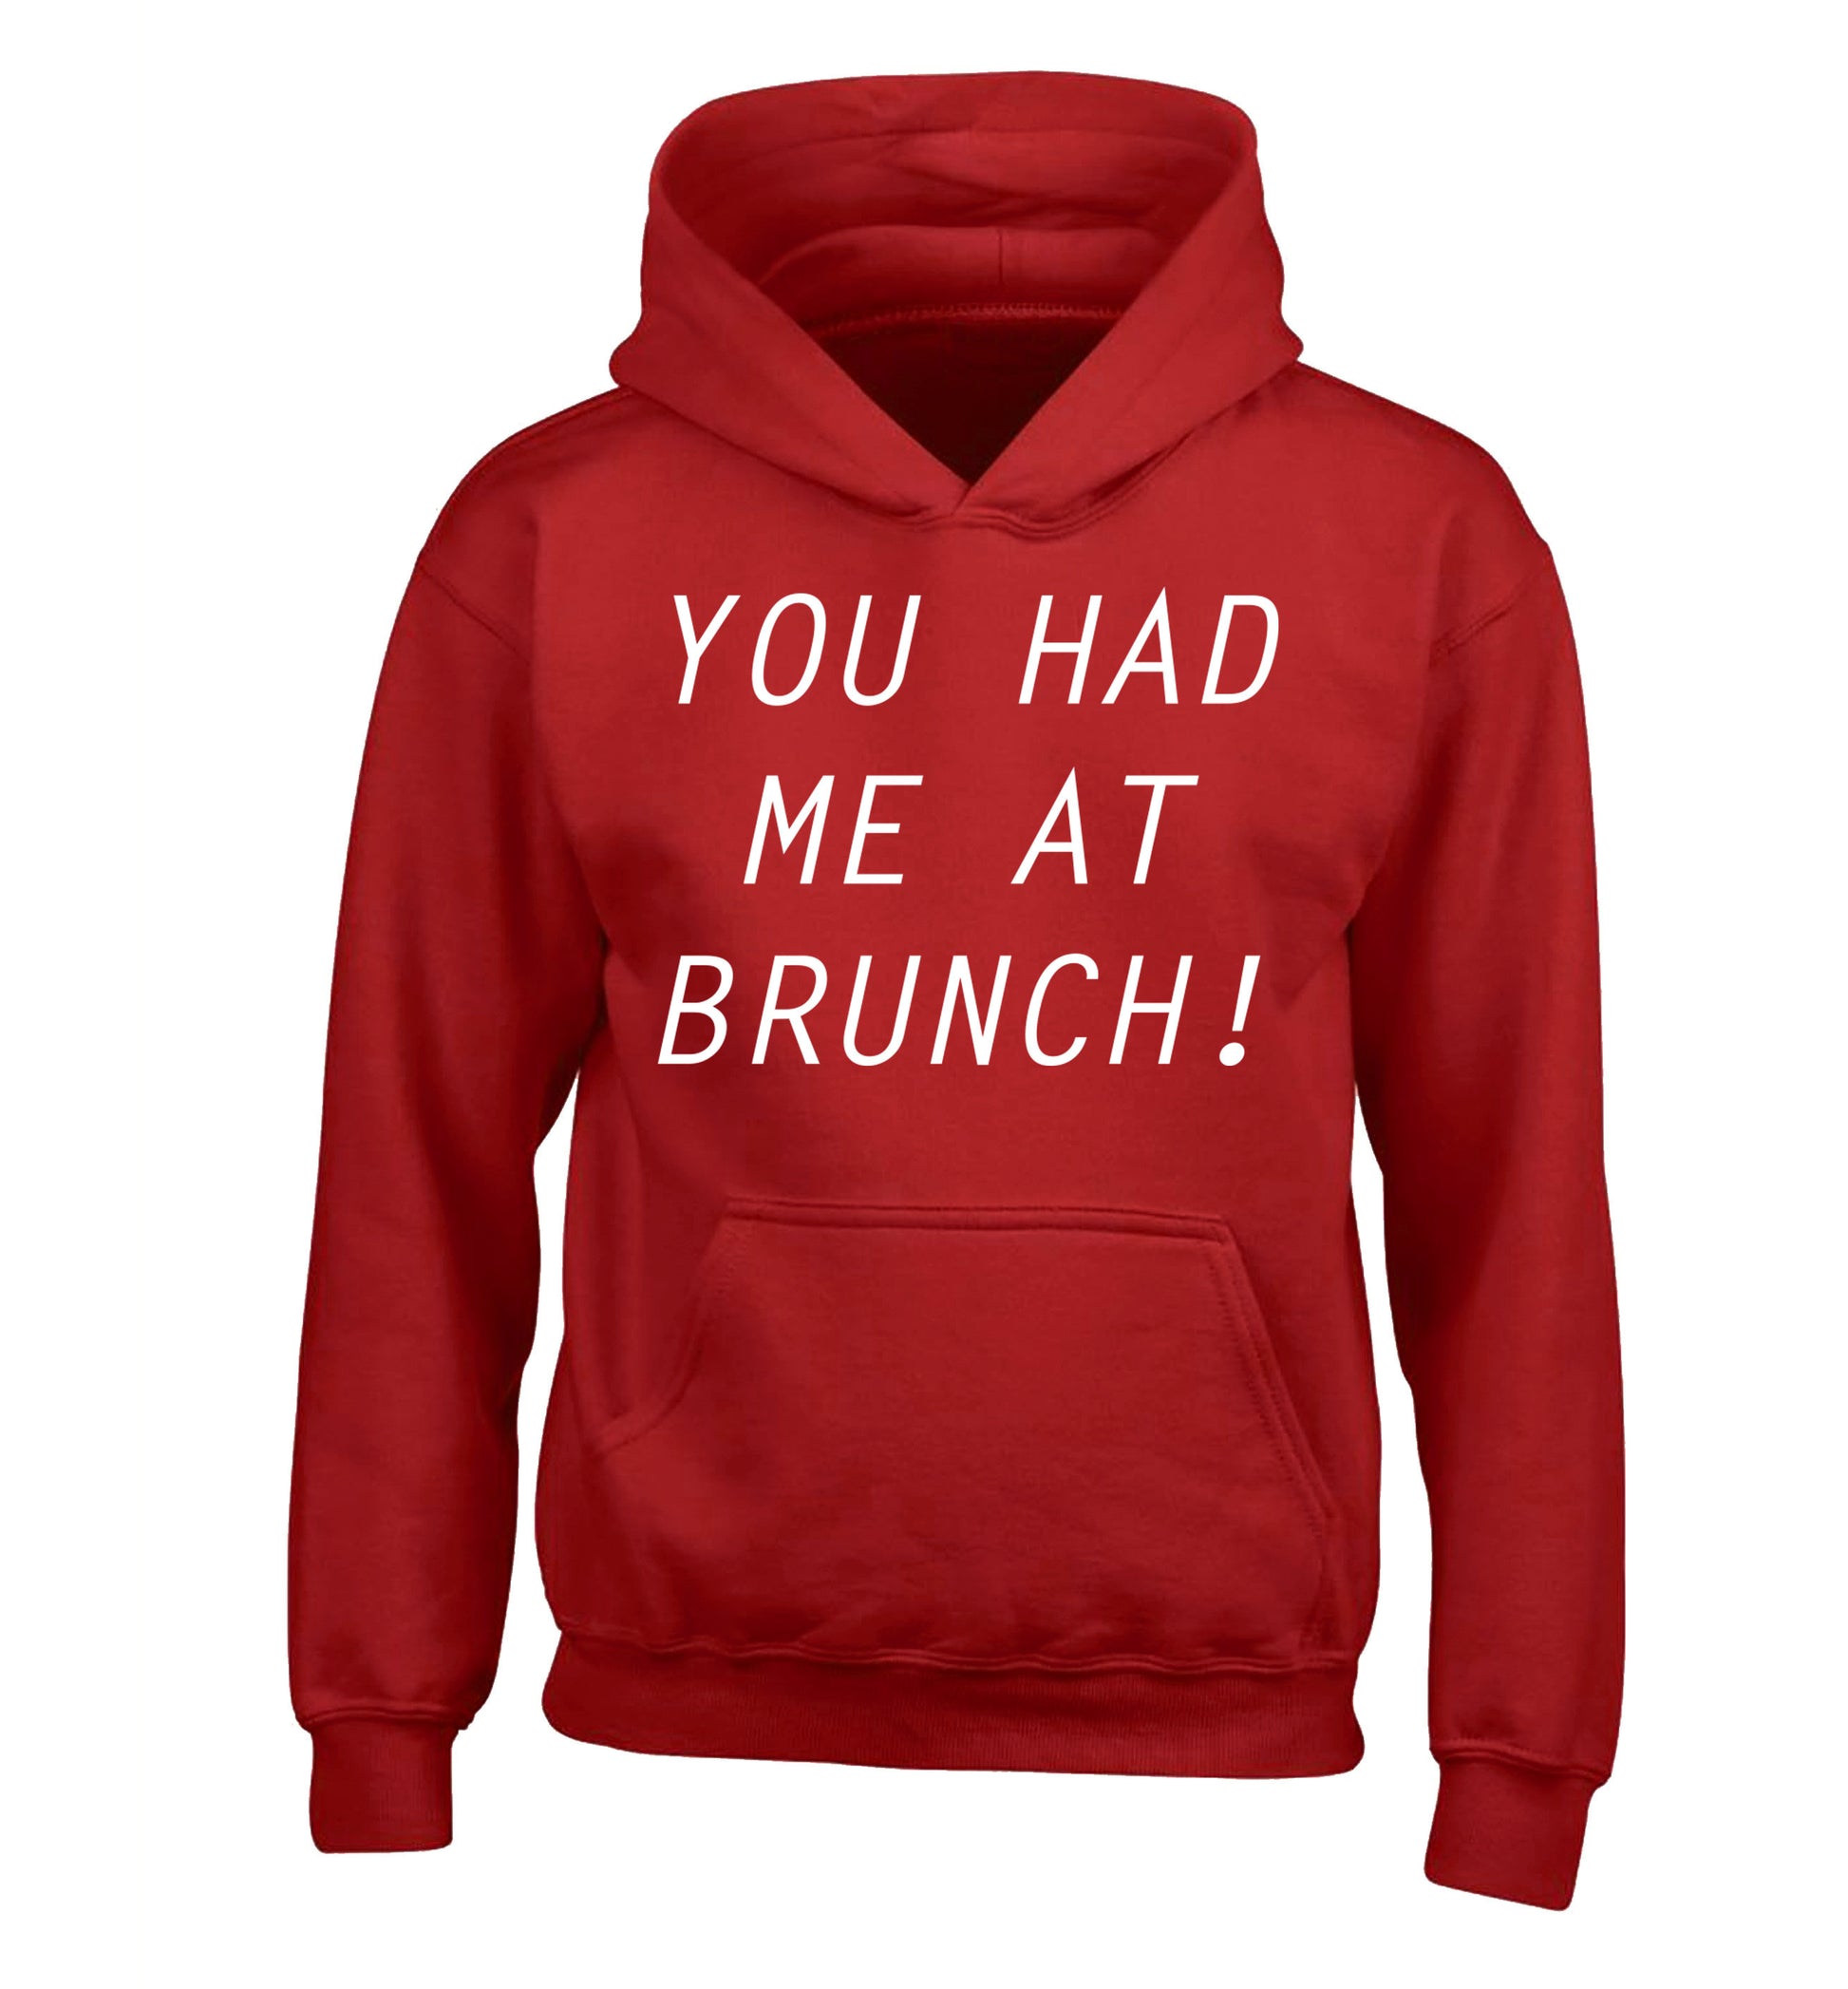 You had me at brunch children's red hoodie 12-14 Years